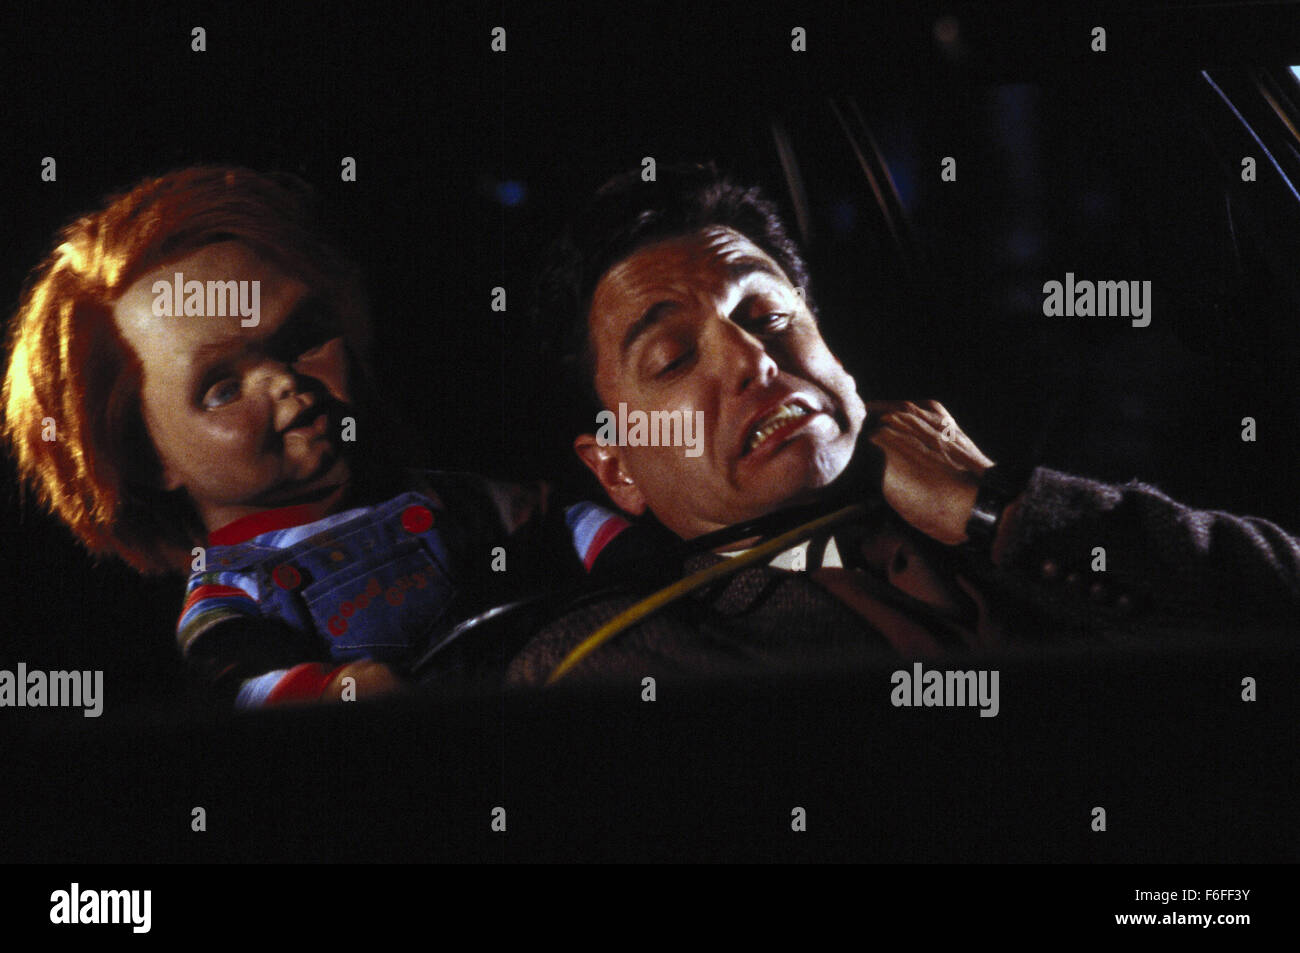 Nov 08, 1988; Chicago, IL, USA; CHRIS SARANDON as Mike Norris in the horror film 'Child's Play' directed by Tom Holland. Stock Photo